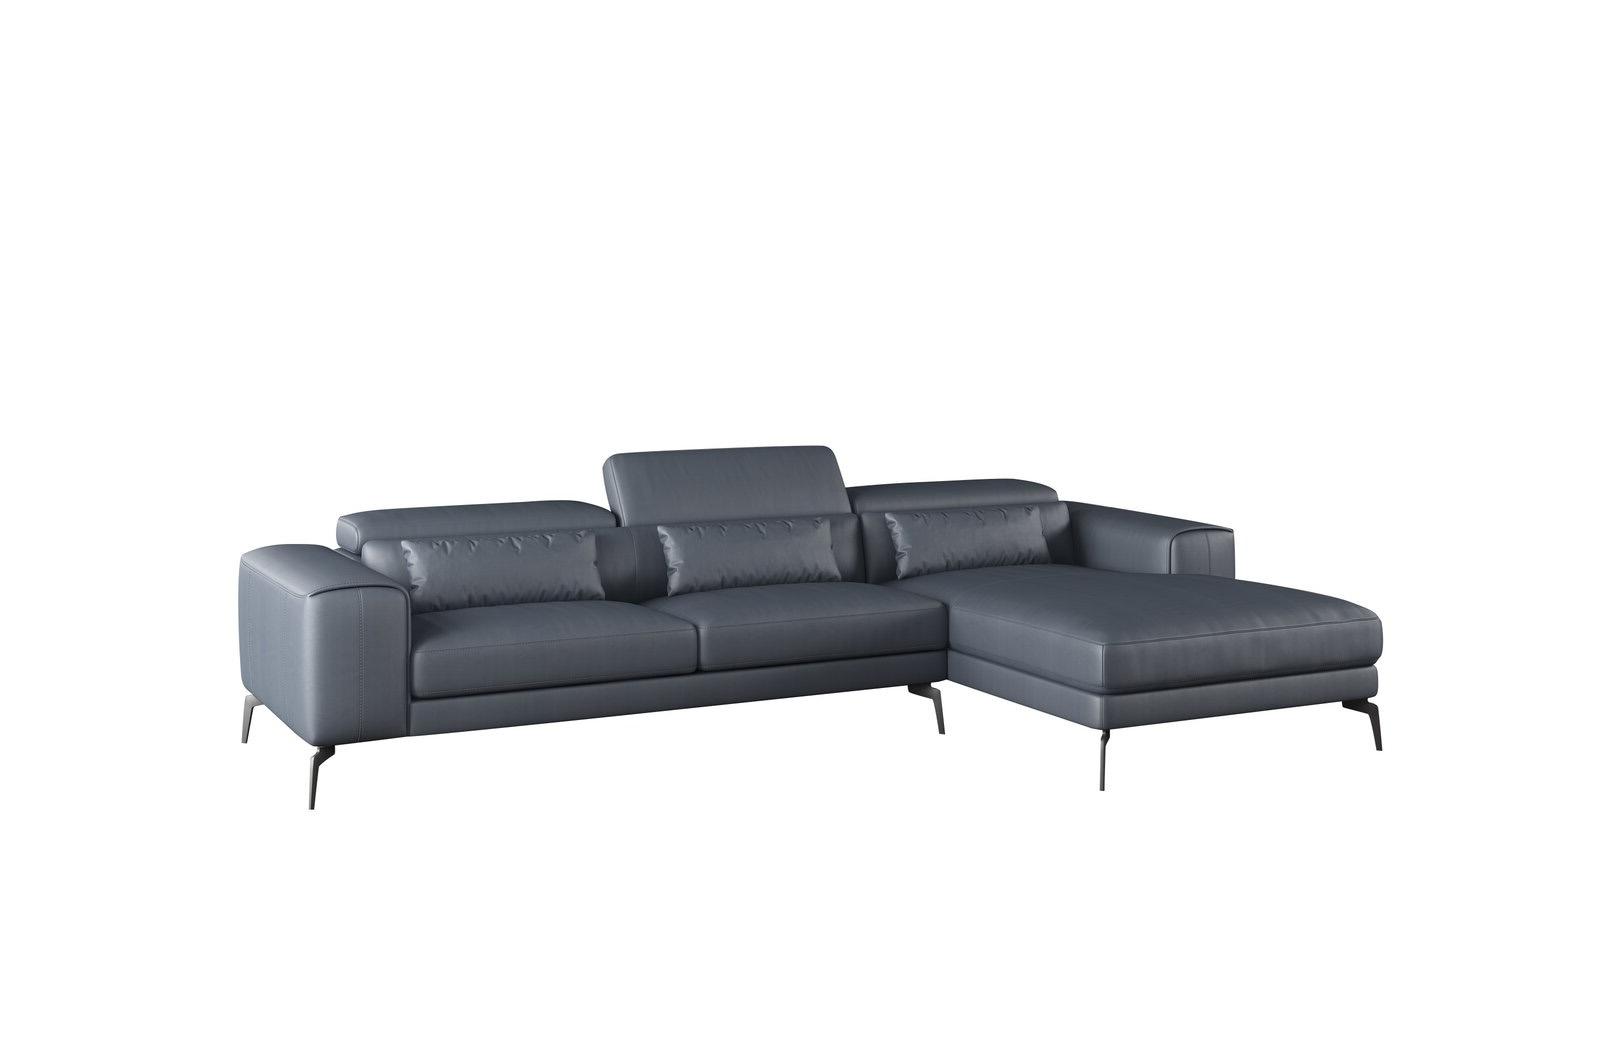 Contemporary, Modern Sectional Sofa CAVOUR EF-12553R-3RHF in Smoke, Gray Leather